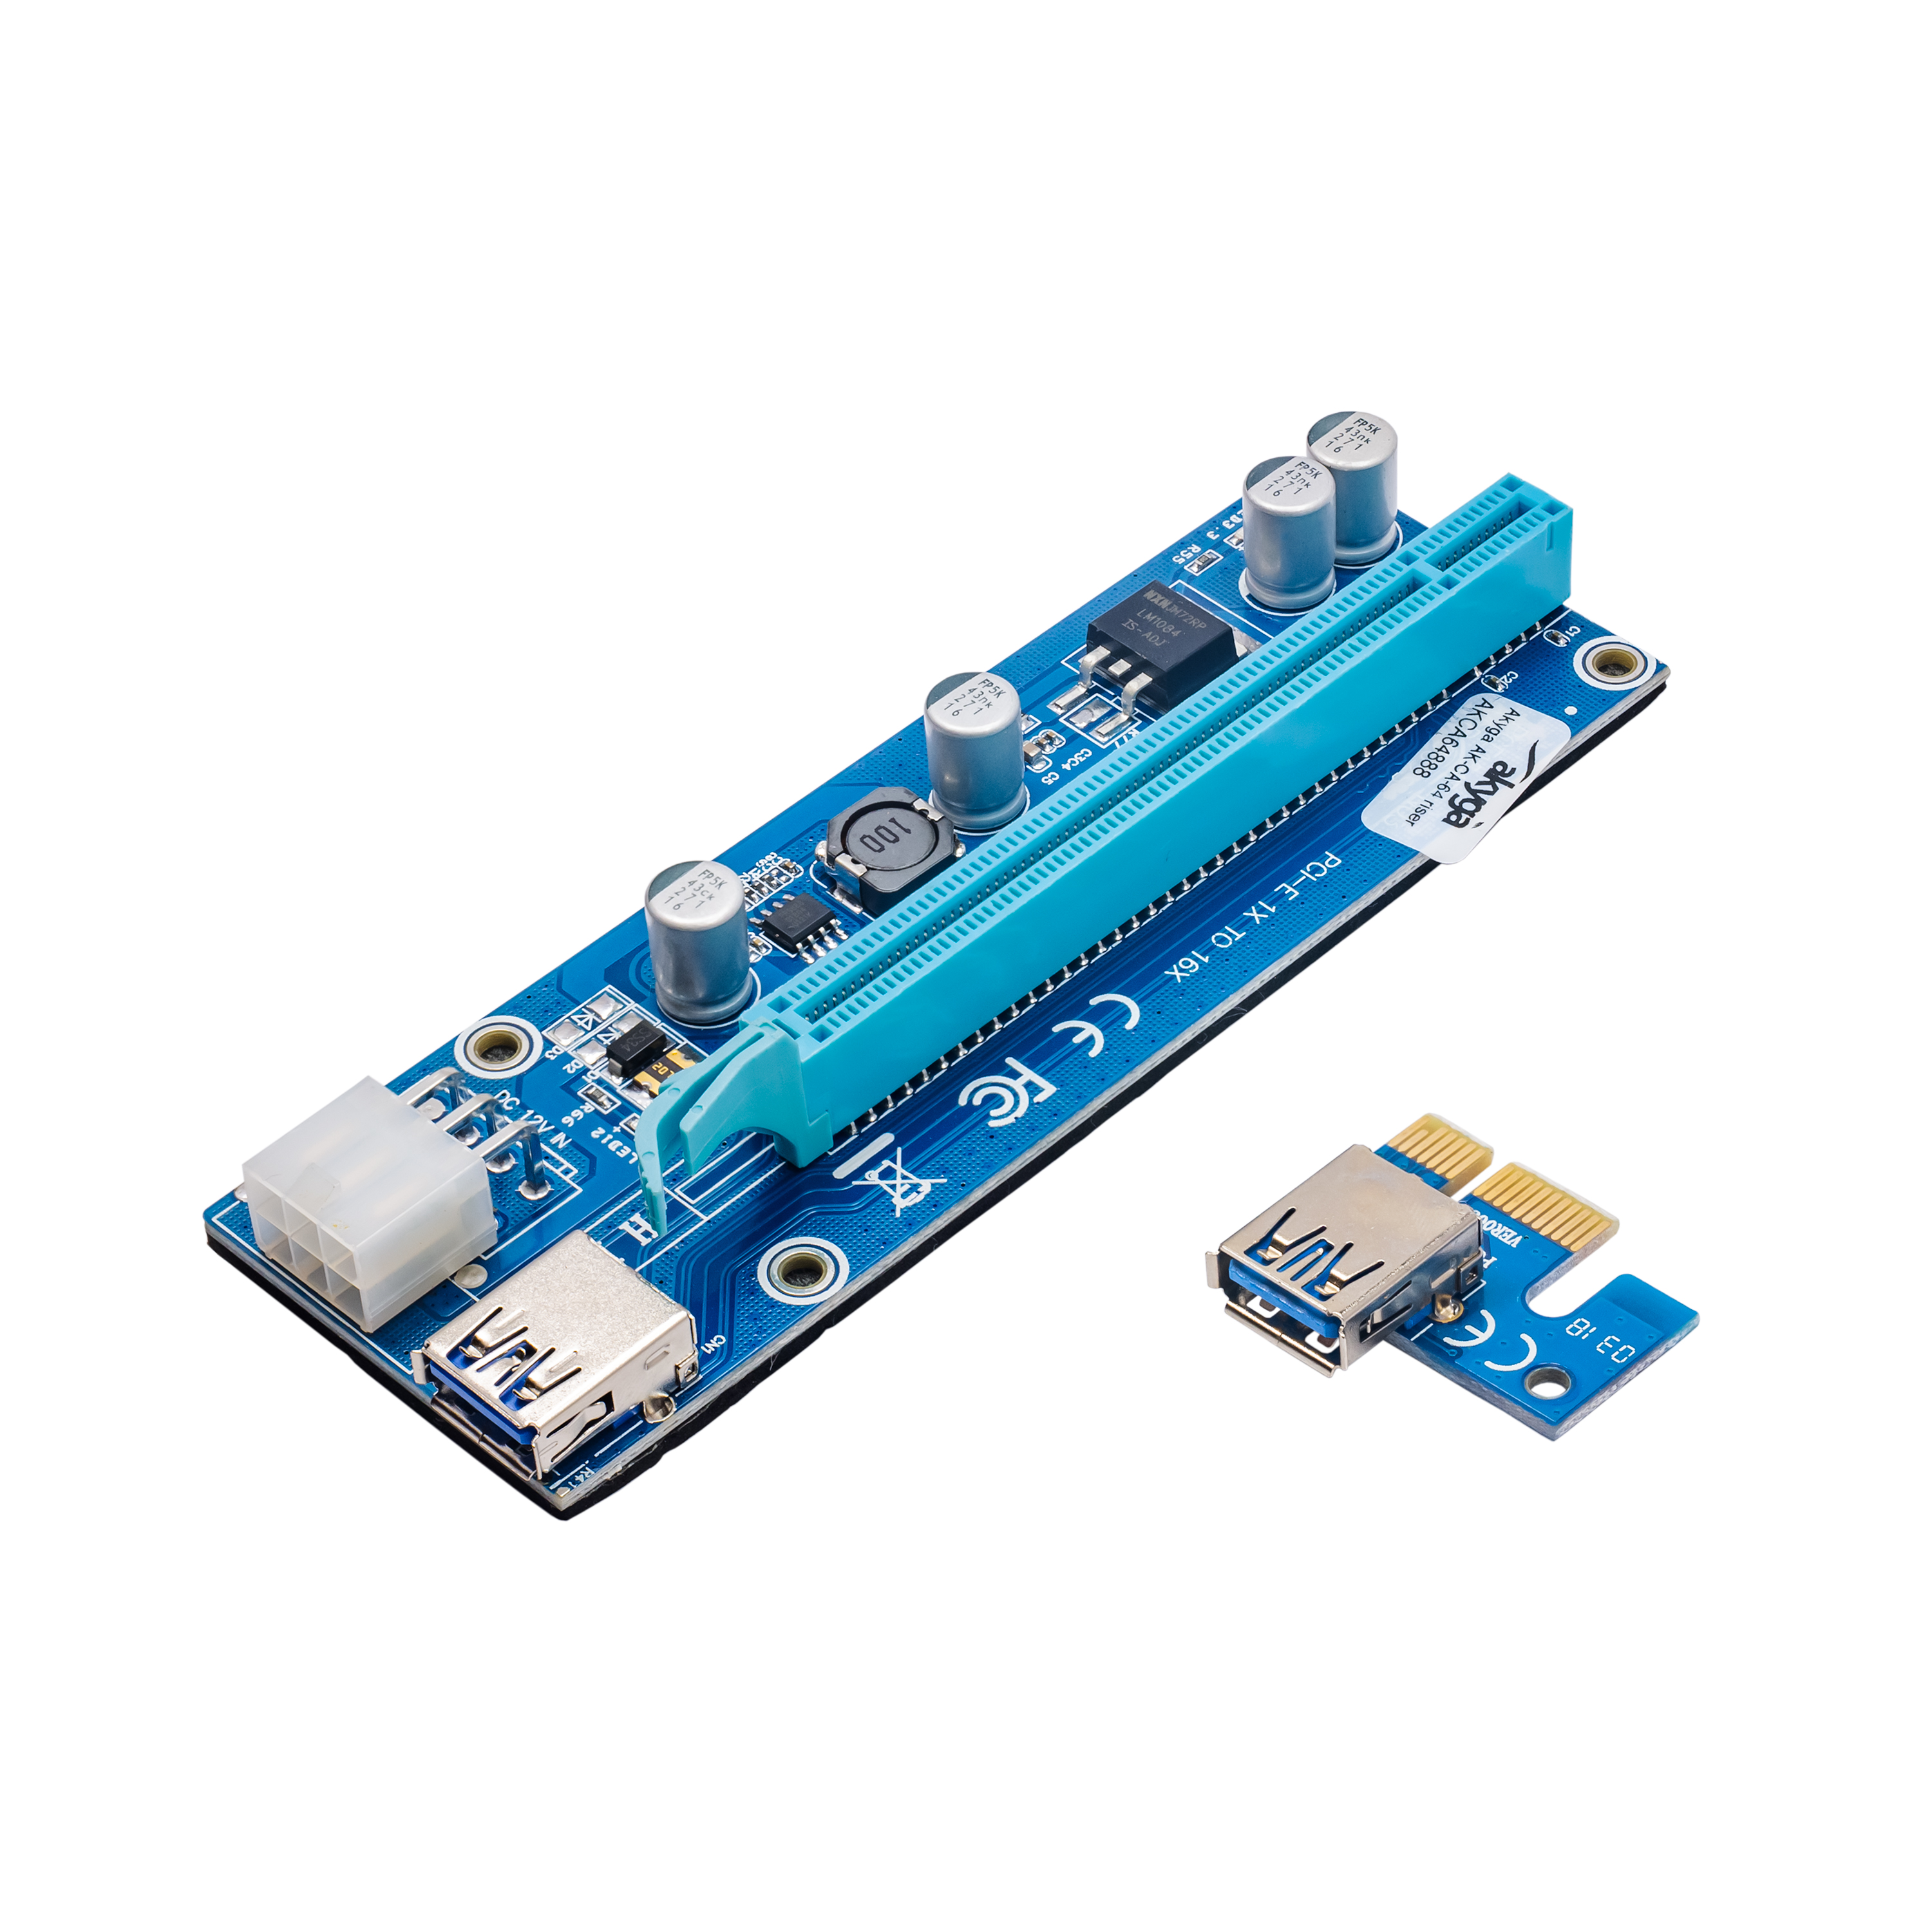 6-pin/SATA/Molex |Ethereum Bitcoin Crypto Currency Mining|with Custom-made 60cm USB 3.0 Cable PCIe Riser|3 in 1 Riser Card|1x to 16x Pcie Riser Board with LED Light|3 Power Options 